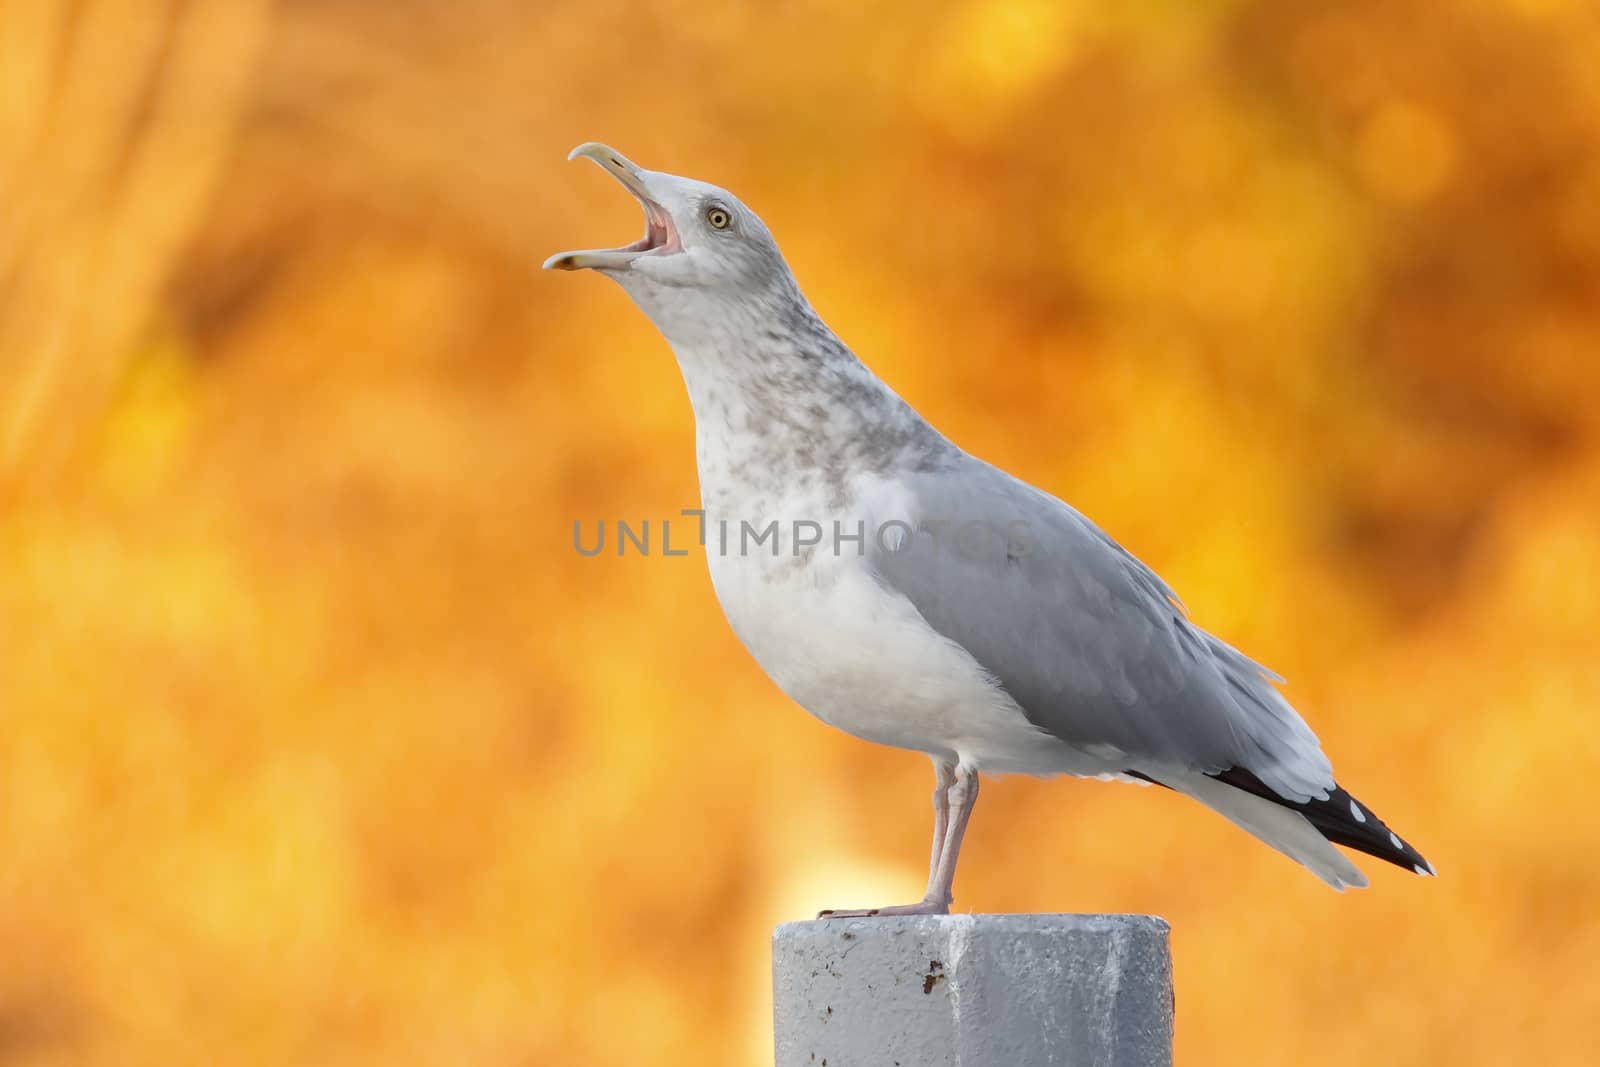 Herring Gull Calling with Autumn Foliage in Background - Canada by gonepaddling